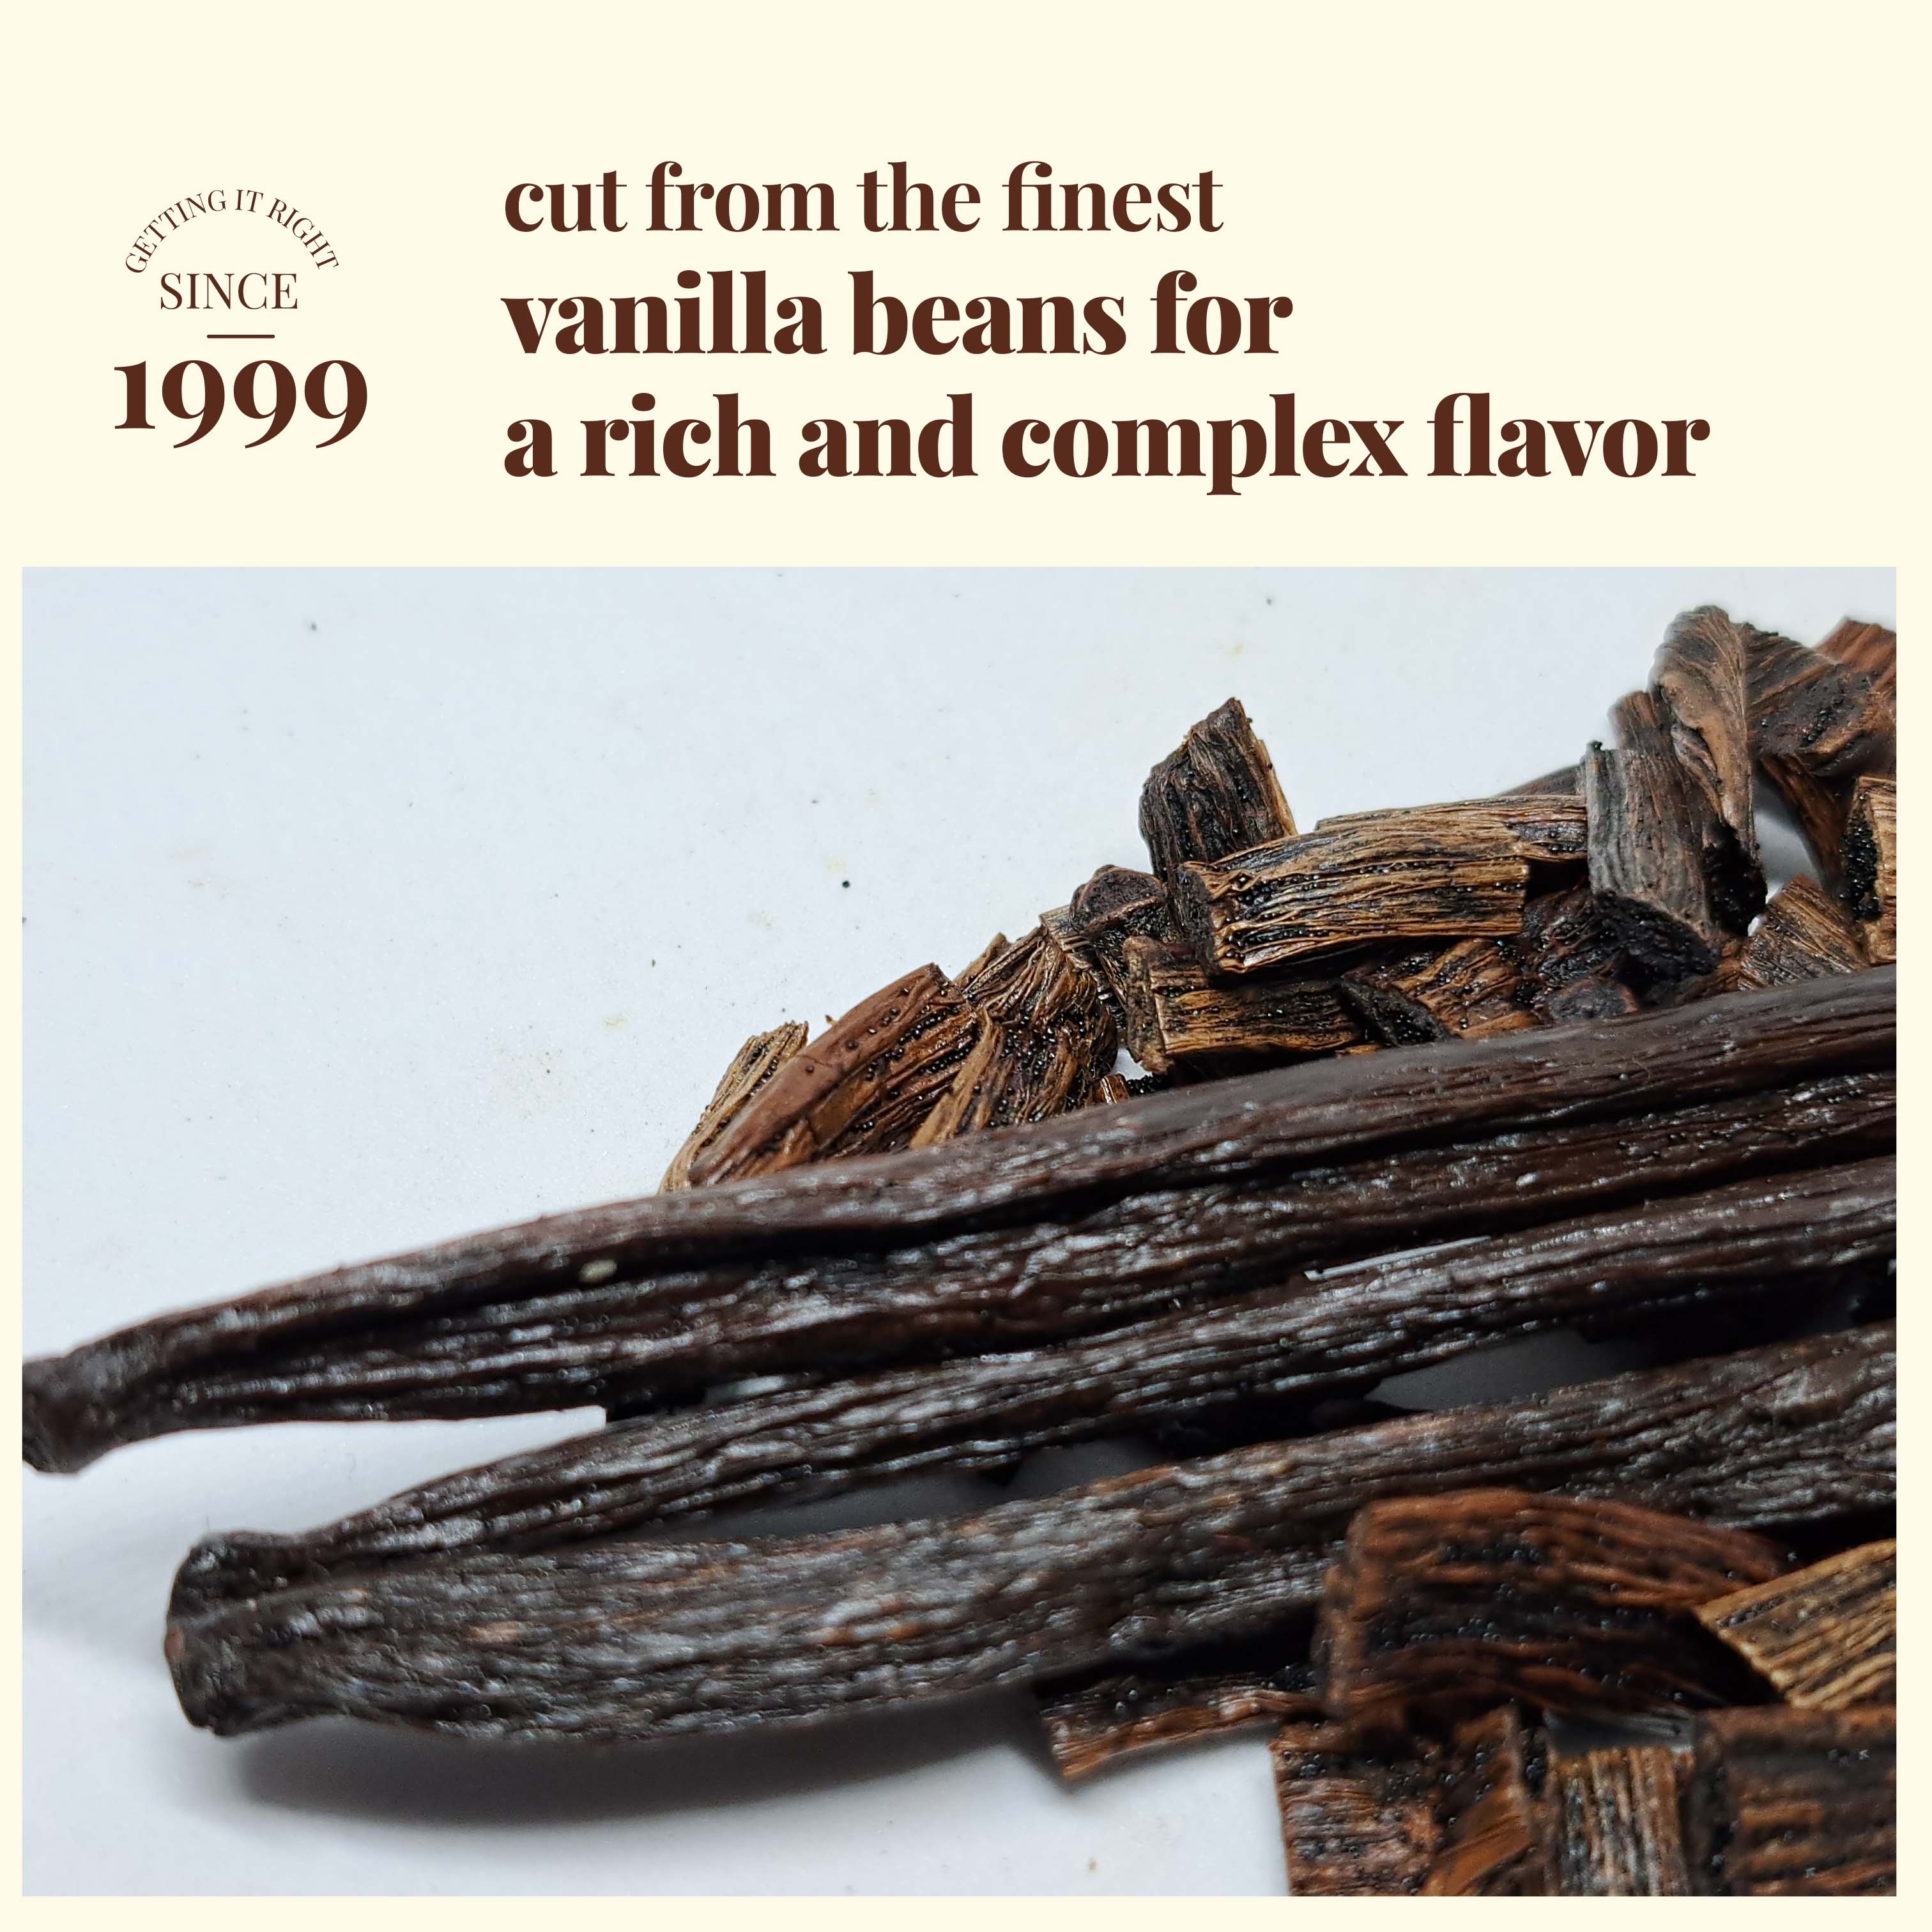 Cut from the finest Vanilla beans for a rich and complex flavor